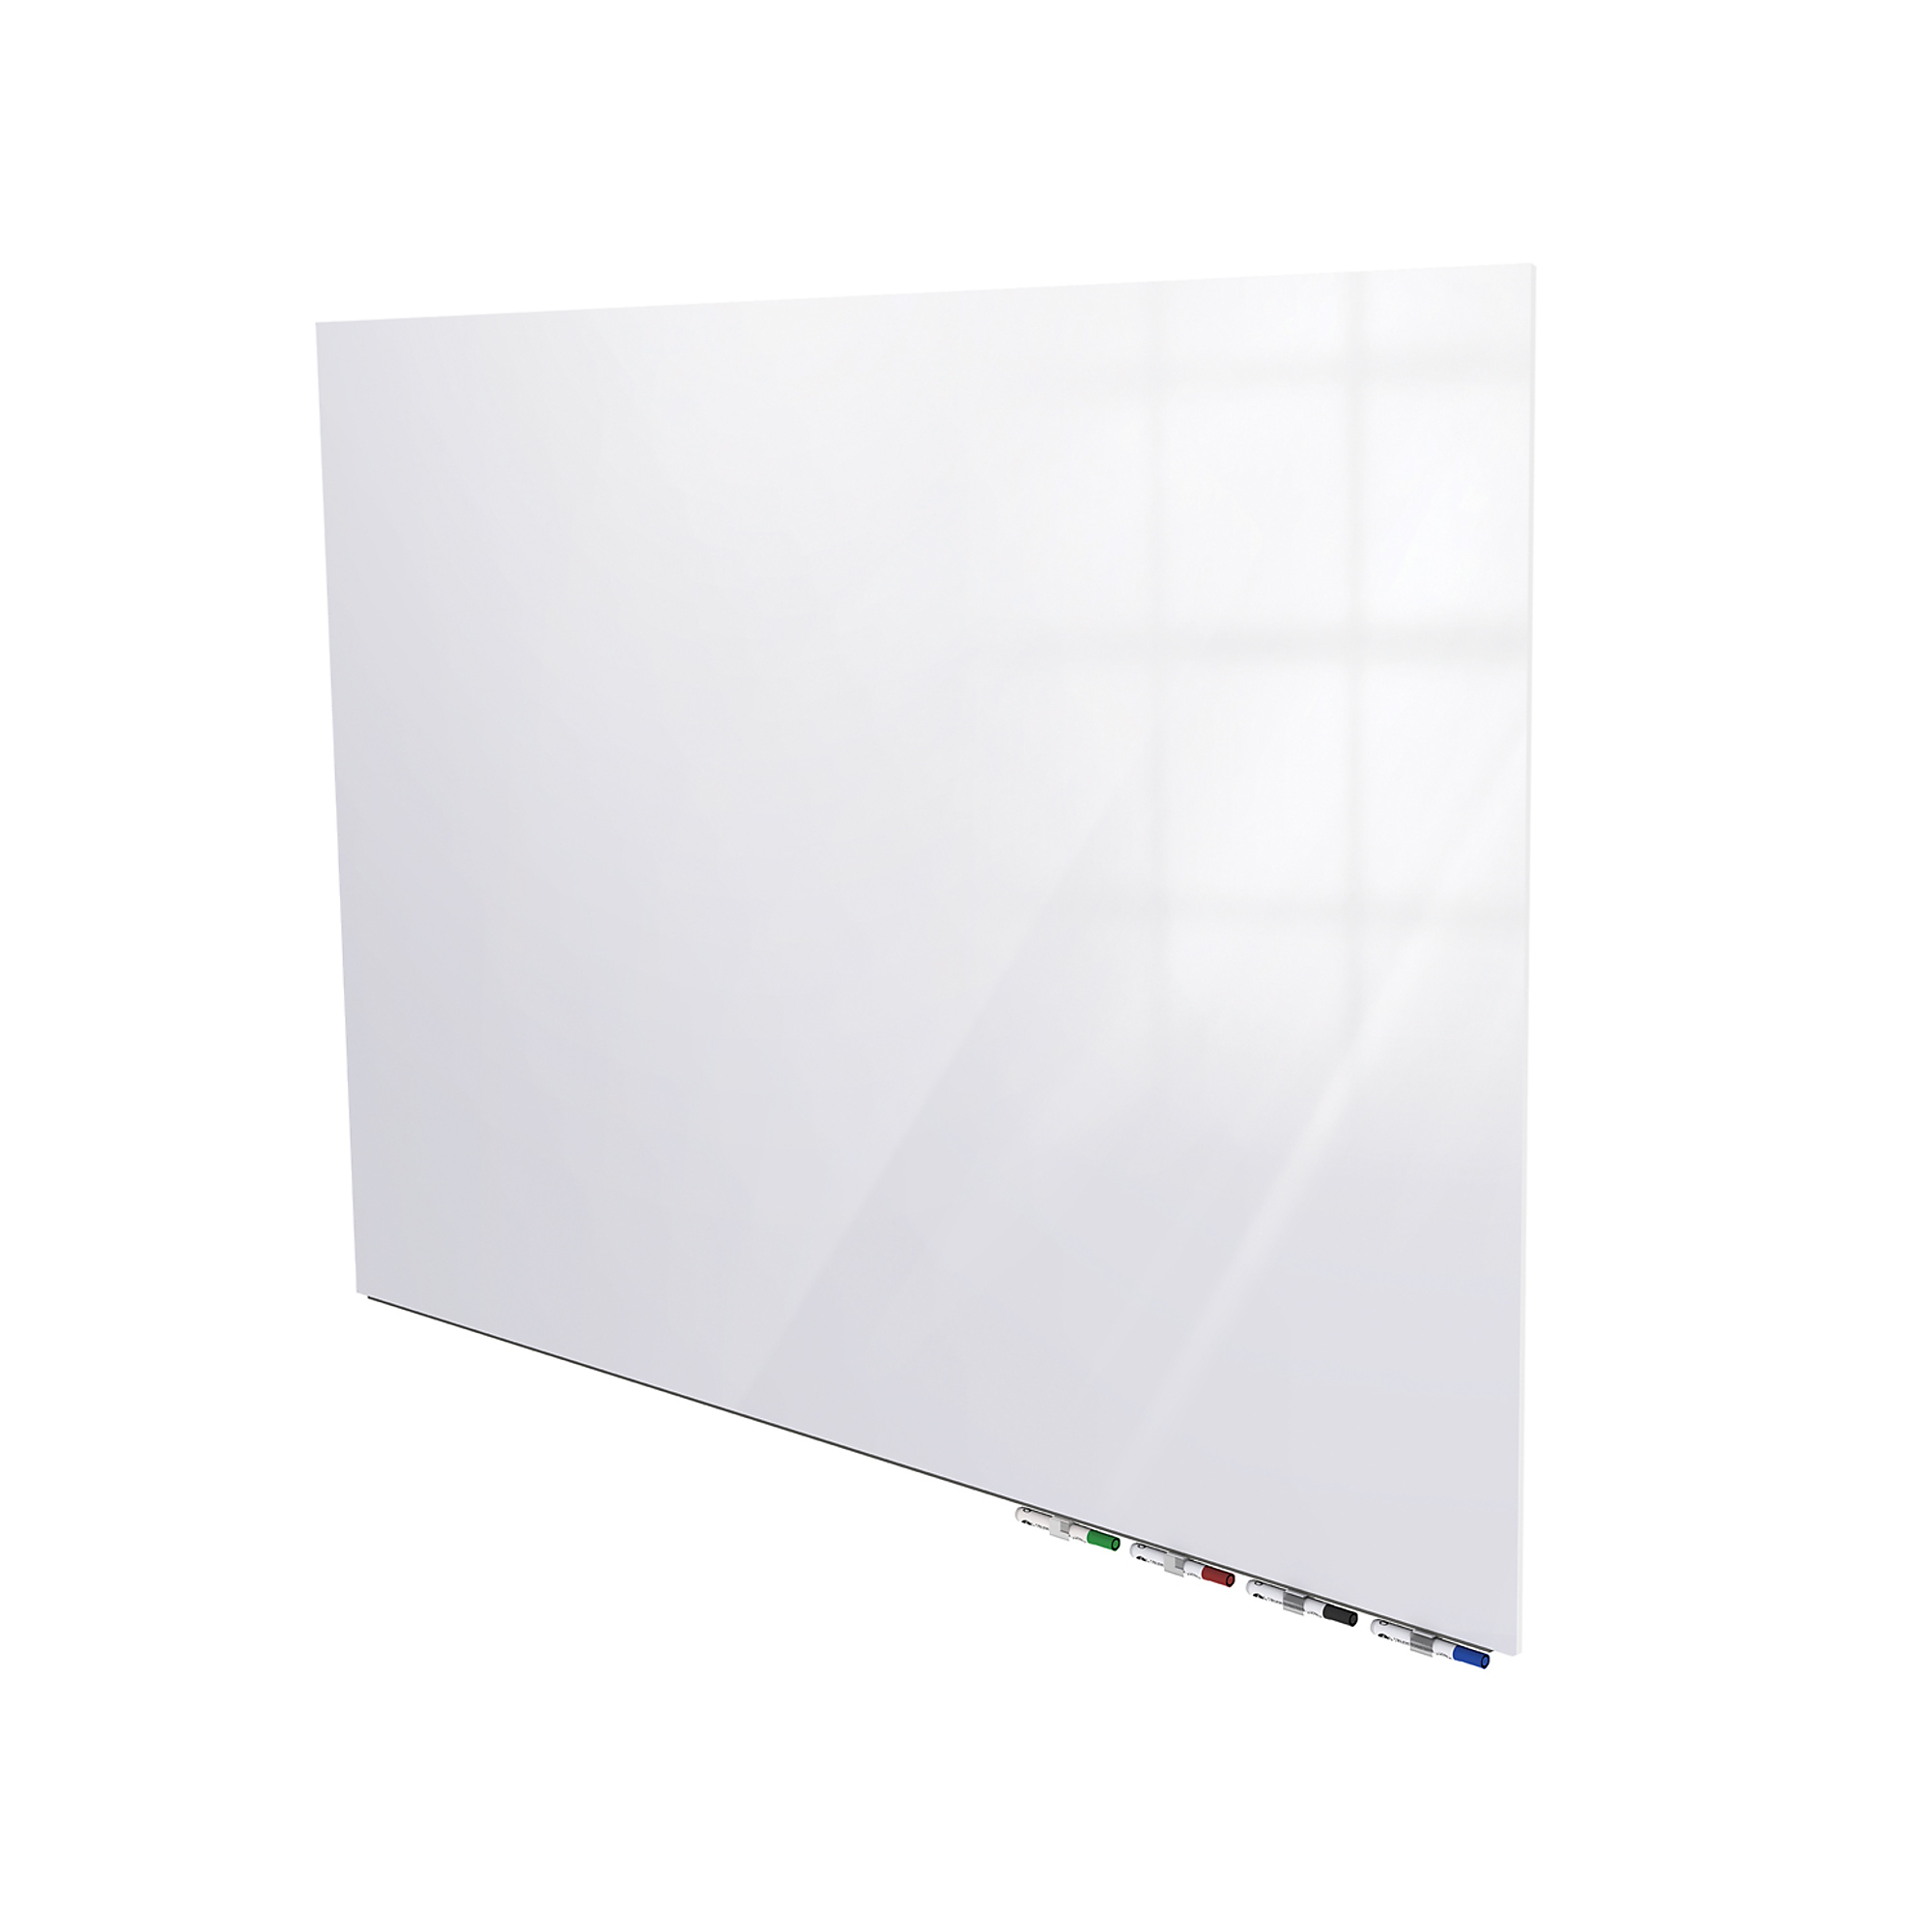 Ghent Aria 4ft.H x 8ft.W Magnetic Glass White Board, White, Color Finish White, Pieces (qty.) 1, Material Multiple, Model ARIASM48WH